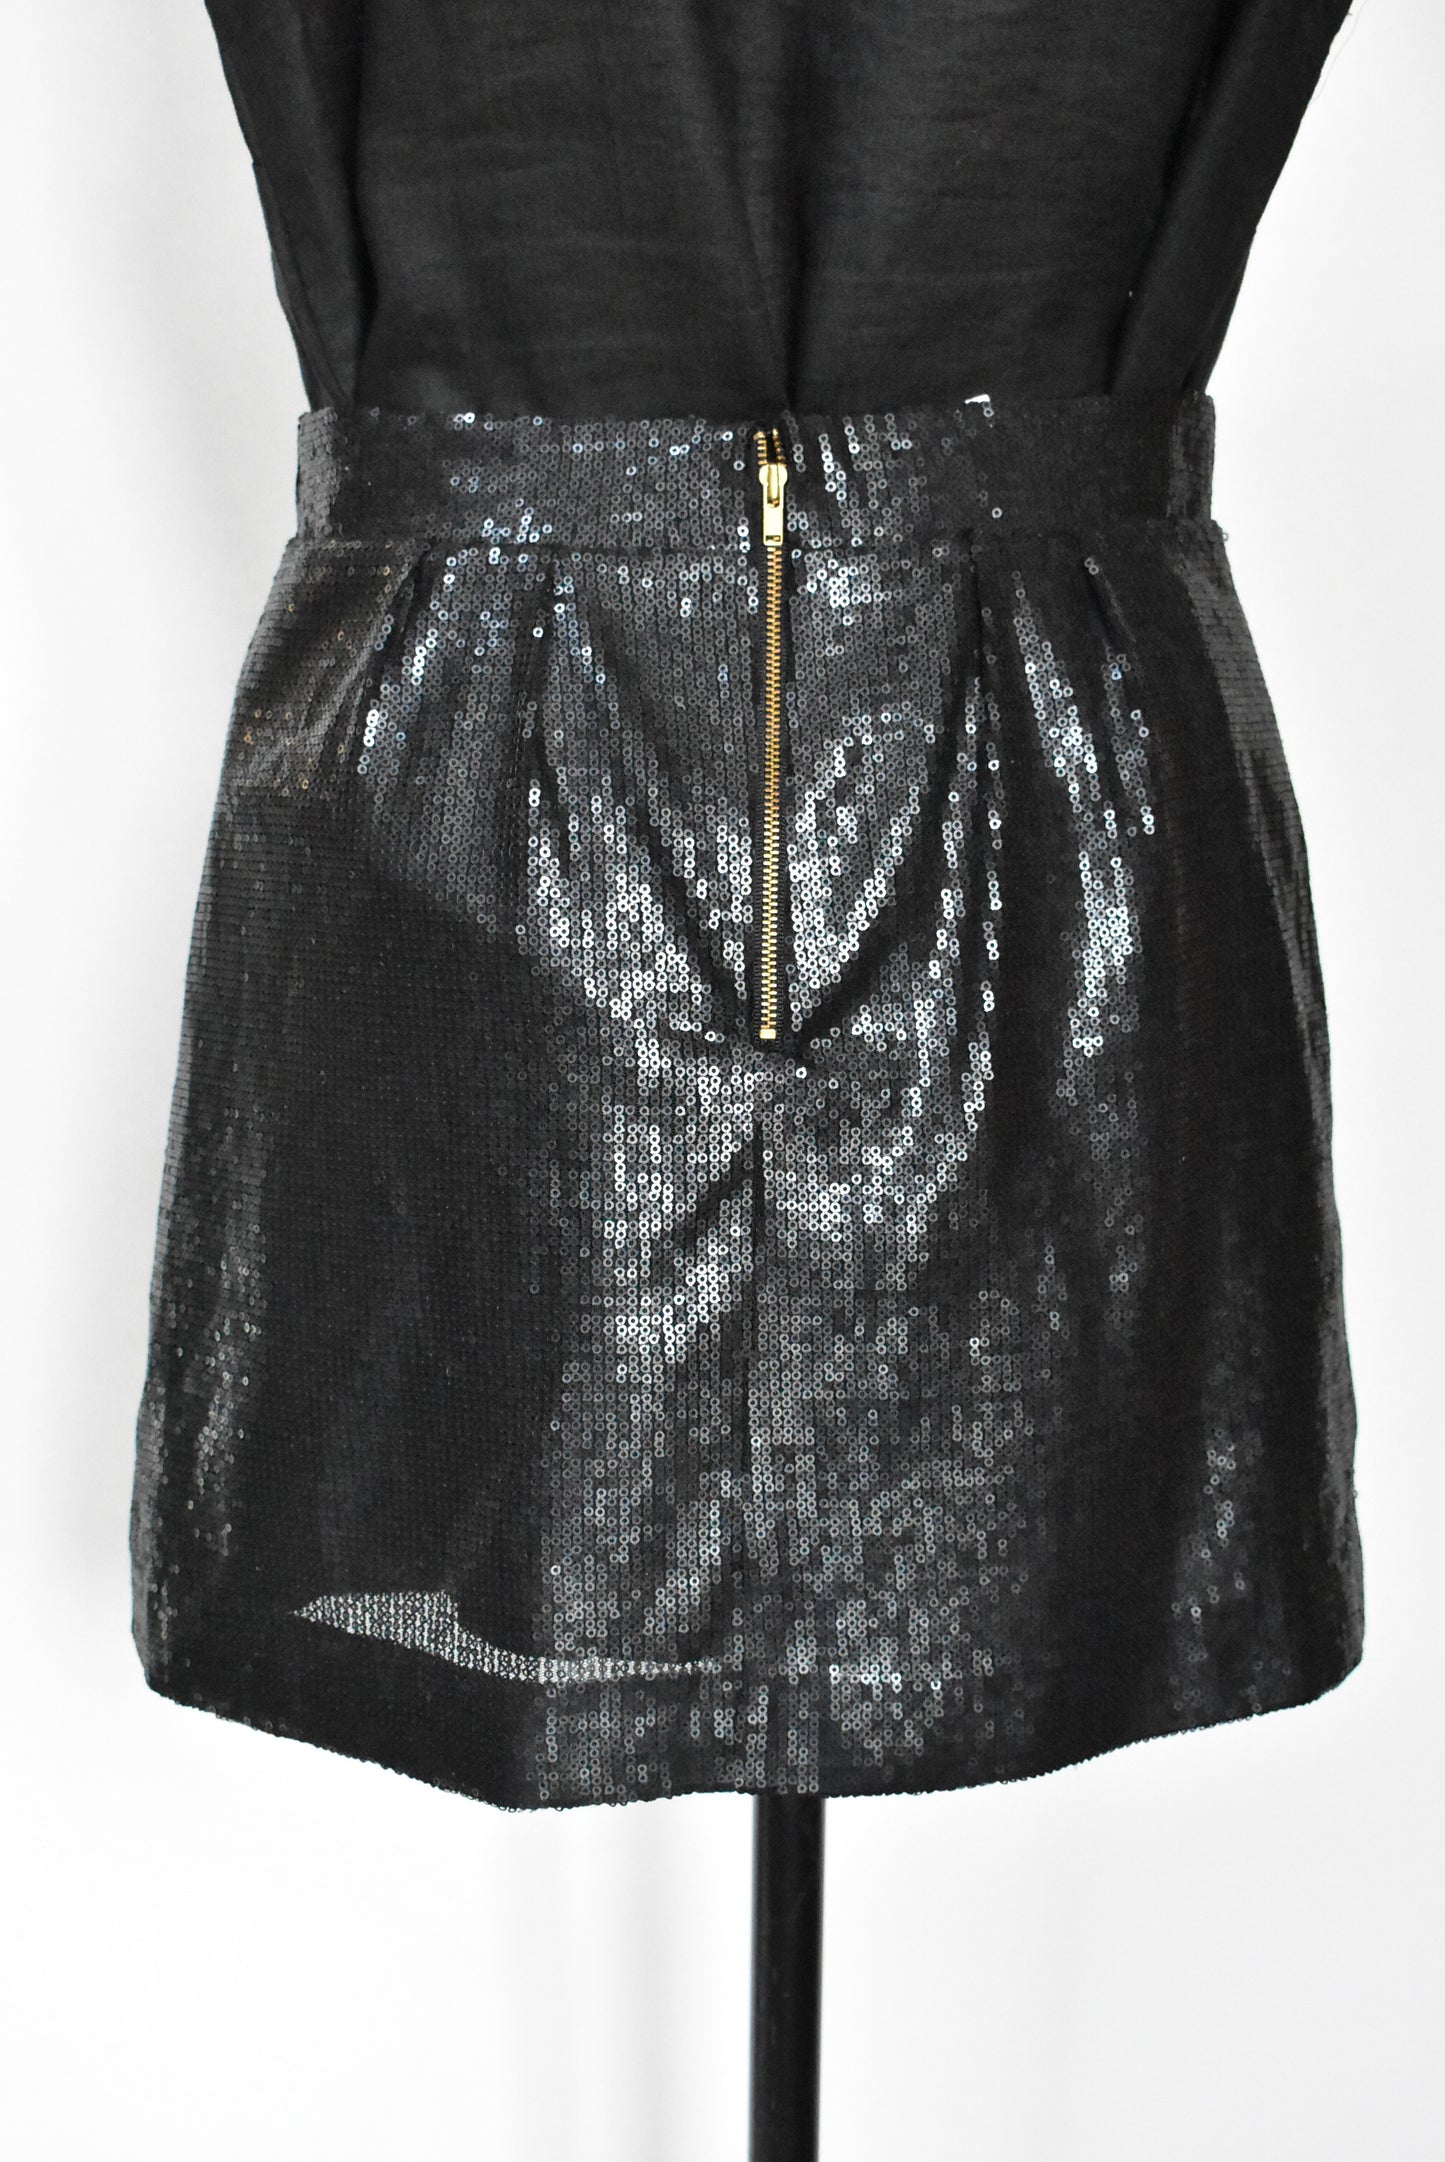 Witchery sequined skirt, 8